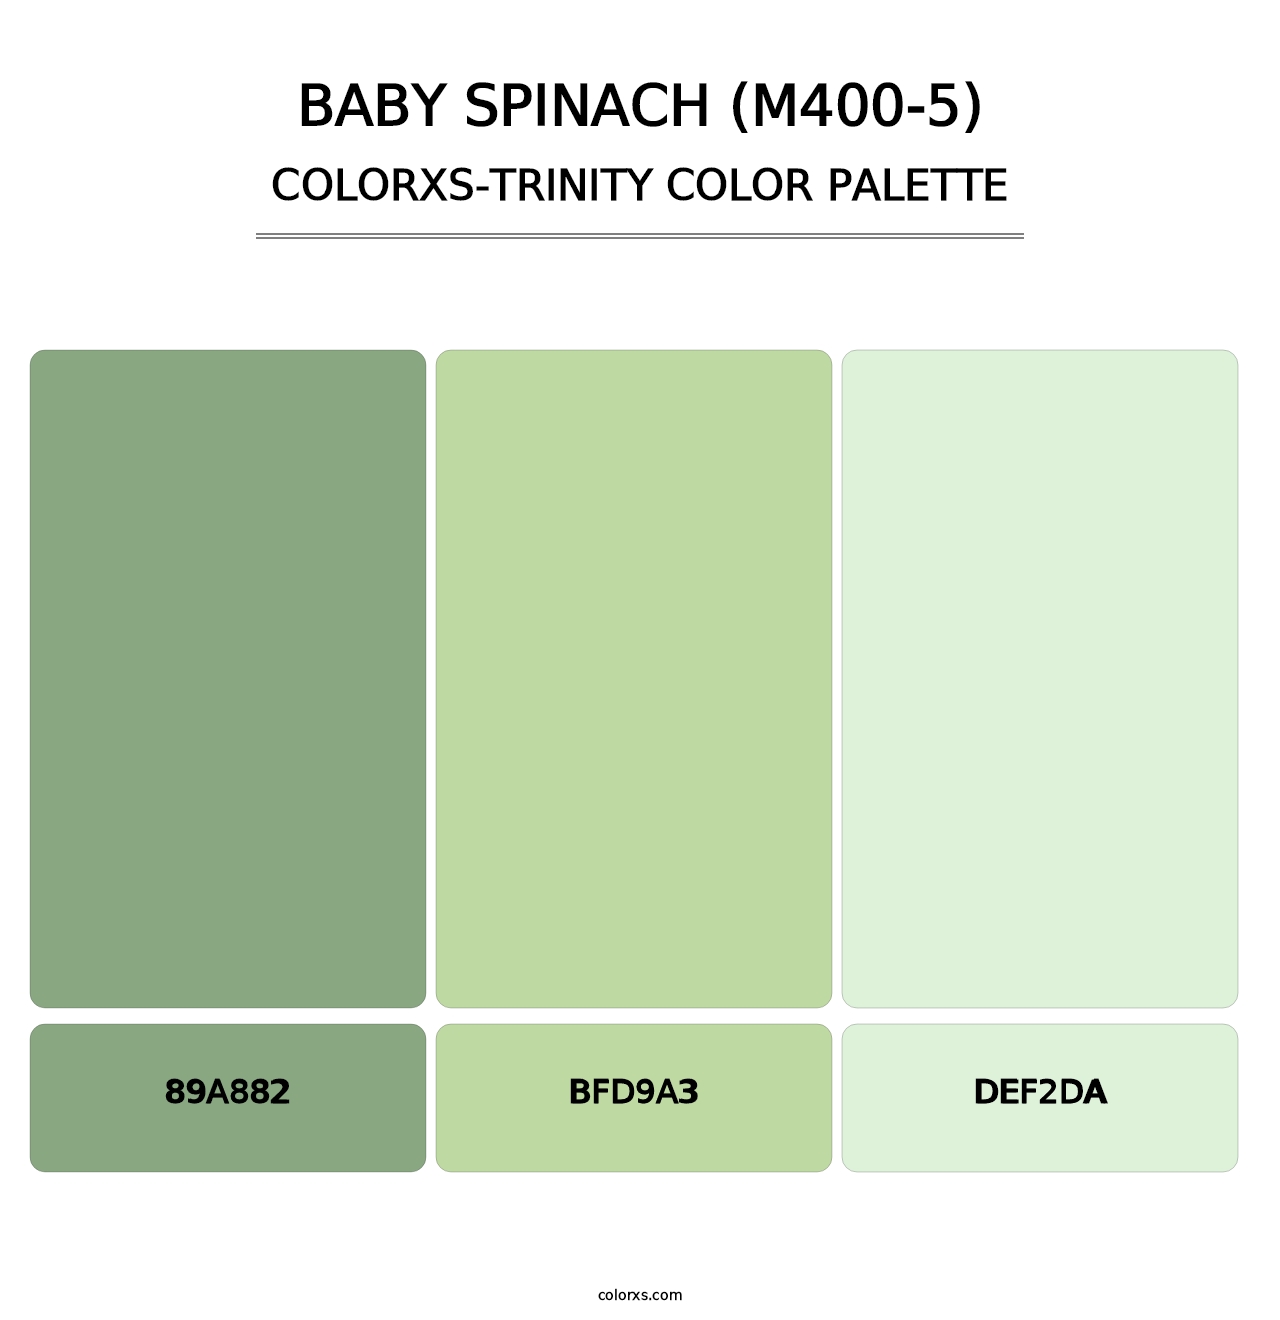 Baby Spinach (M400-5) - Colorxs Trinity Palette